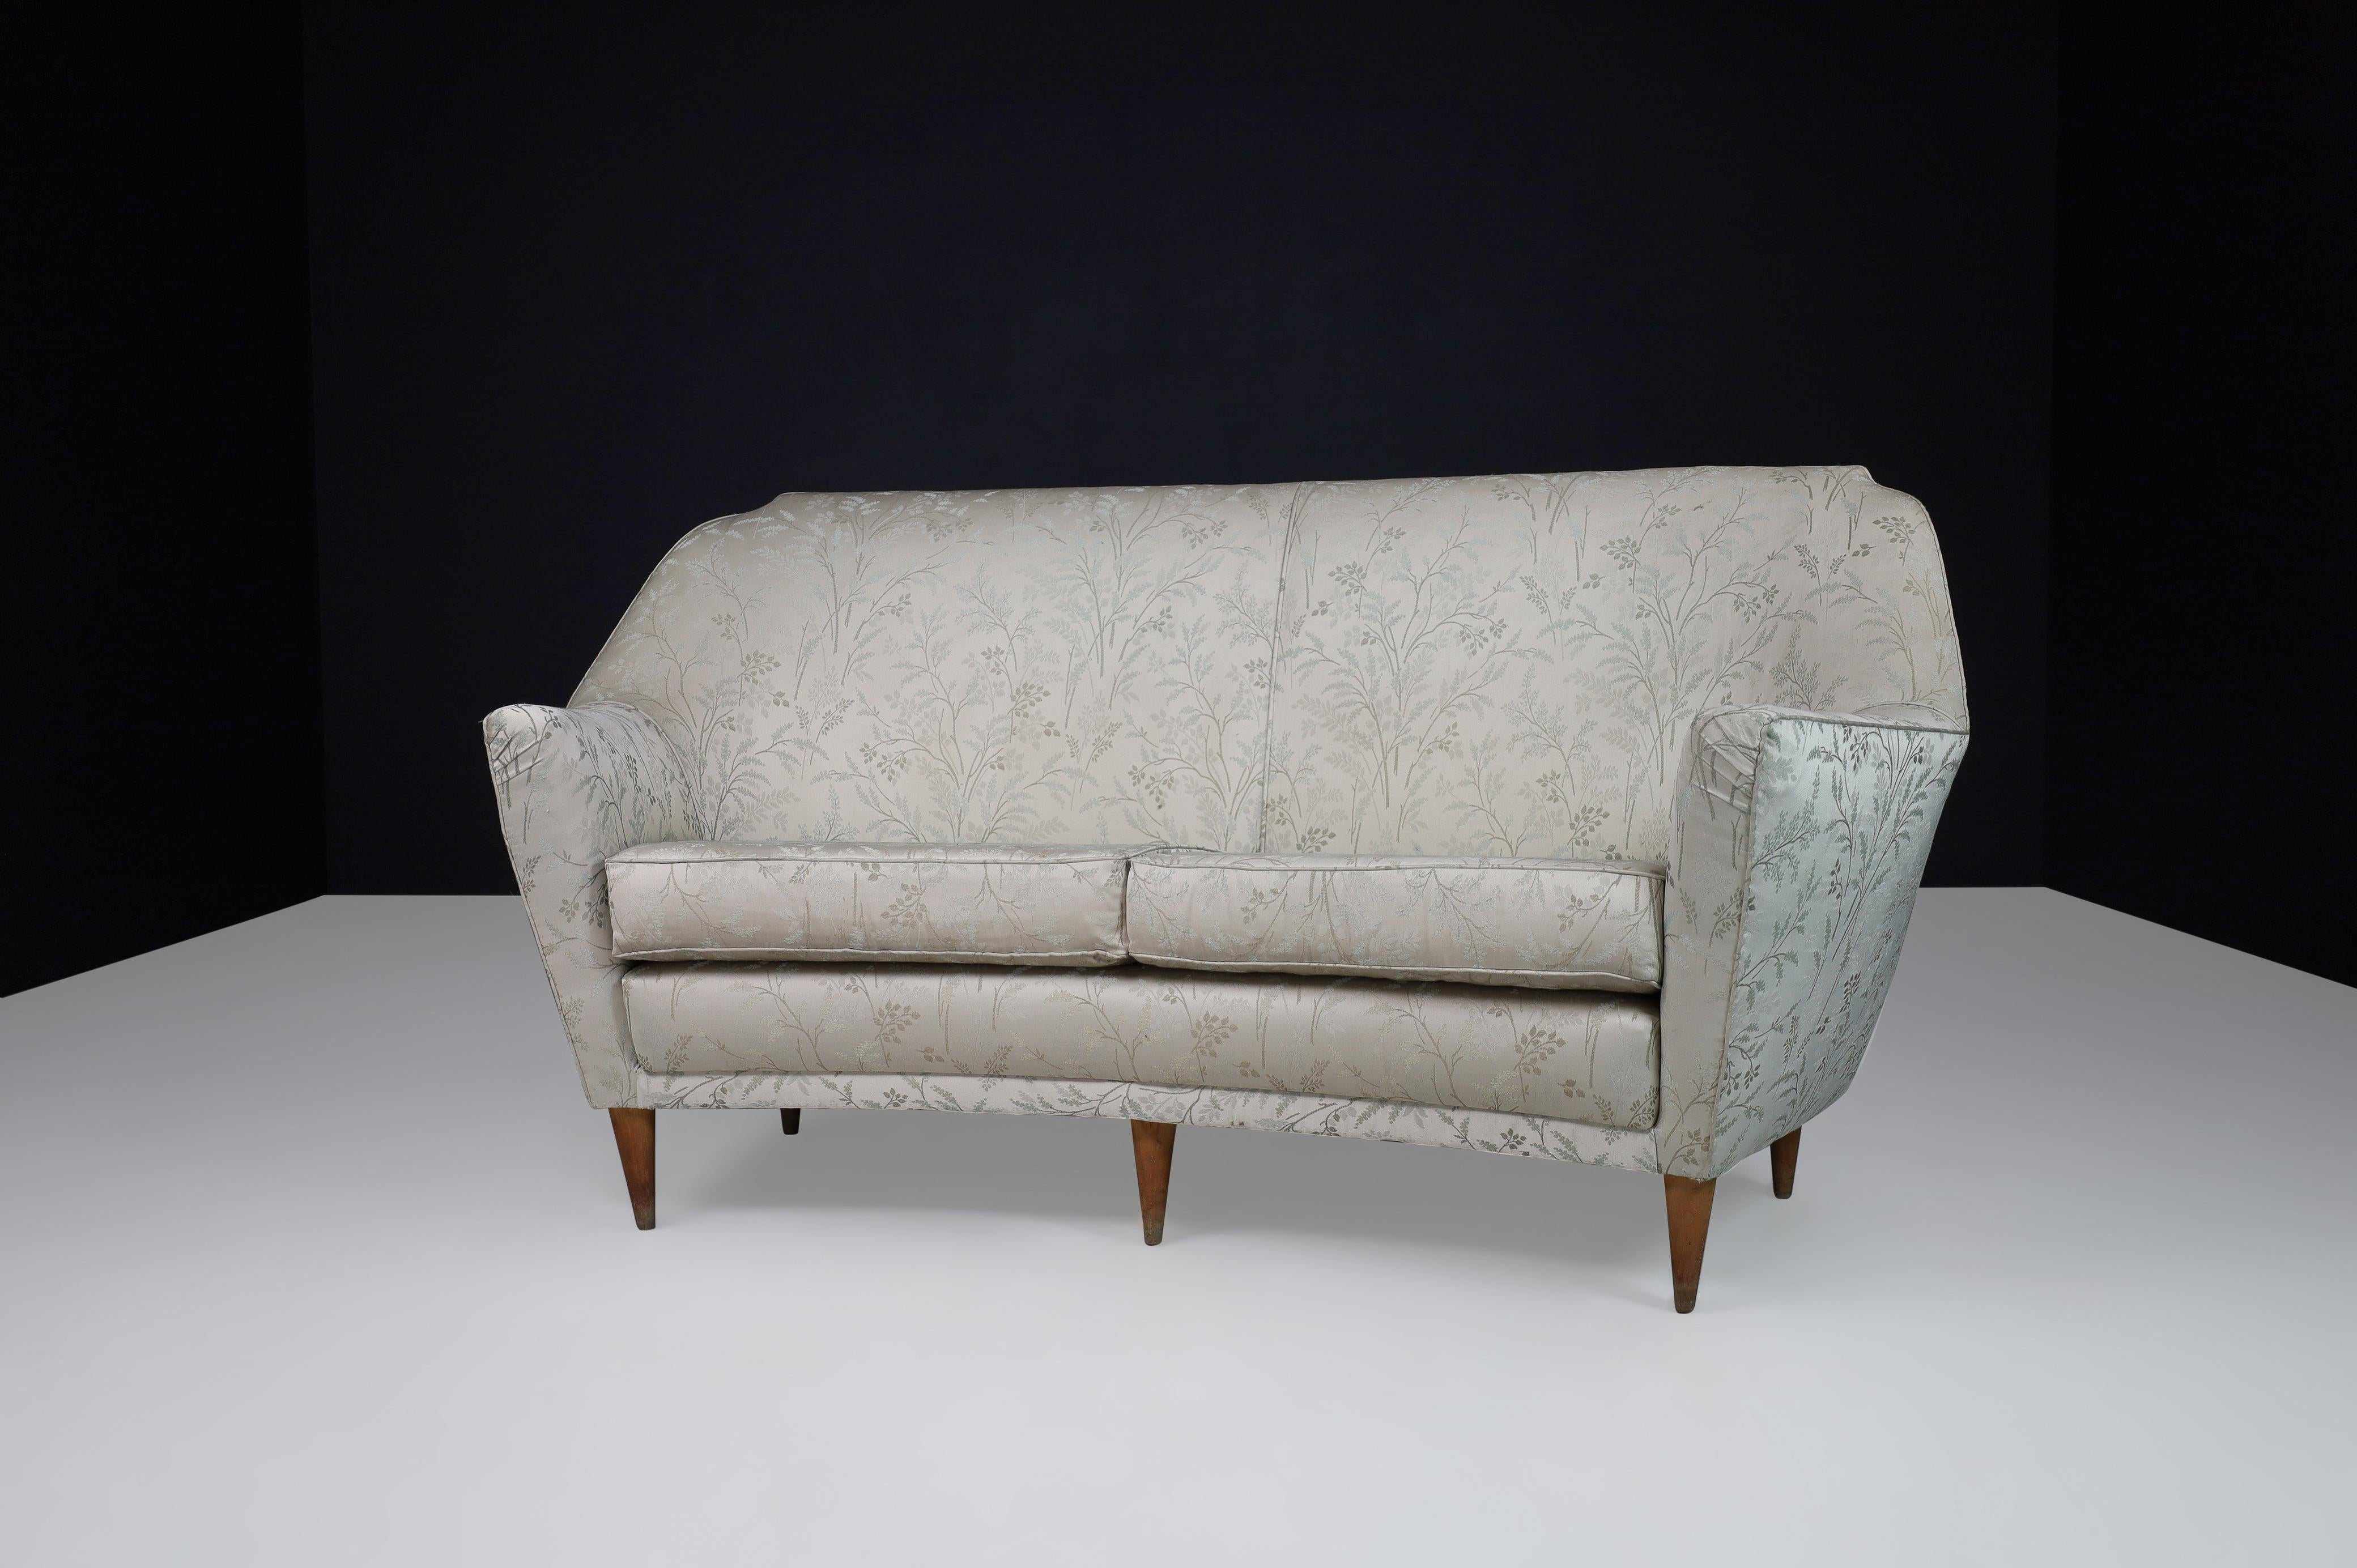 Ico Parisi Sofa in Leaf Motif Fabric and Tapered Wooden Legs, Italy, 1950s For Sale 4